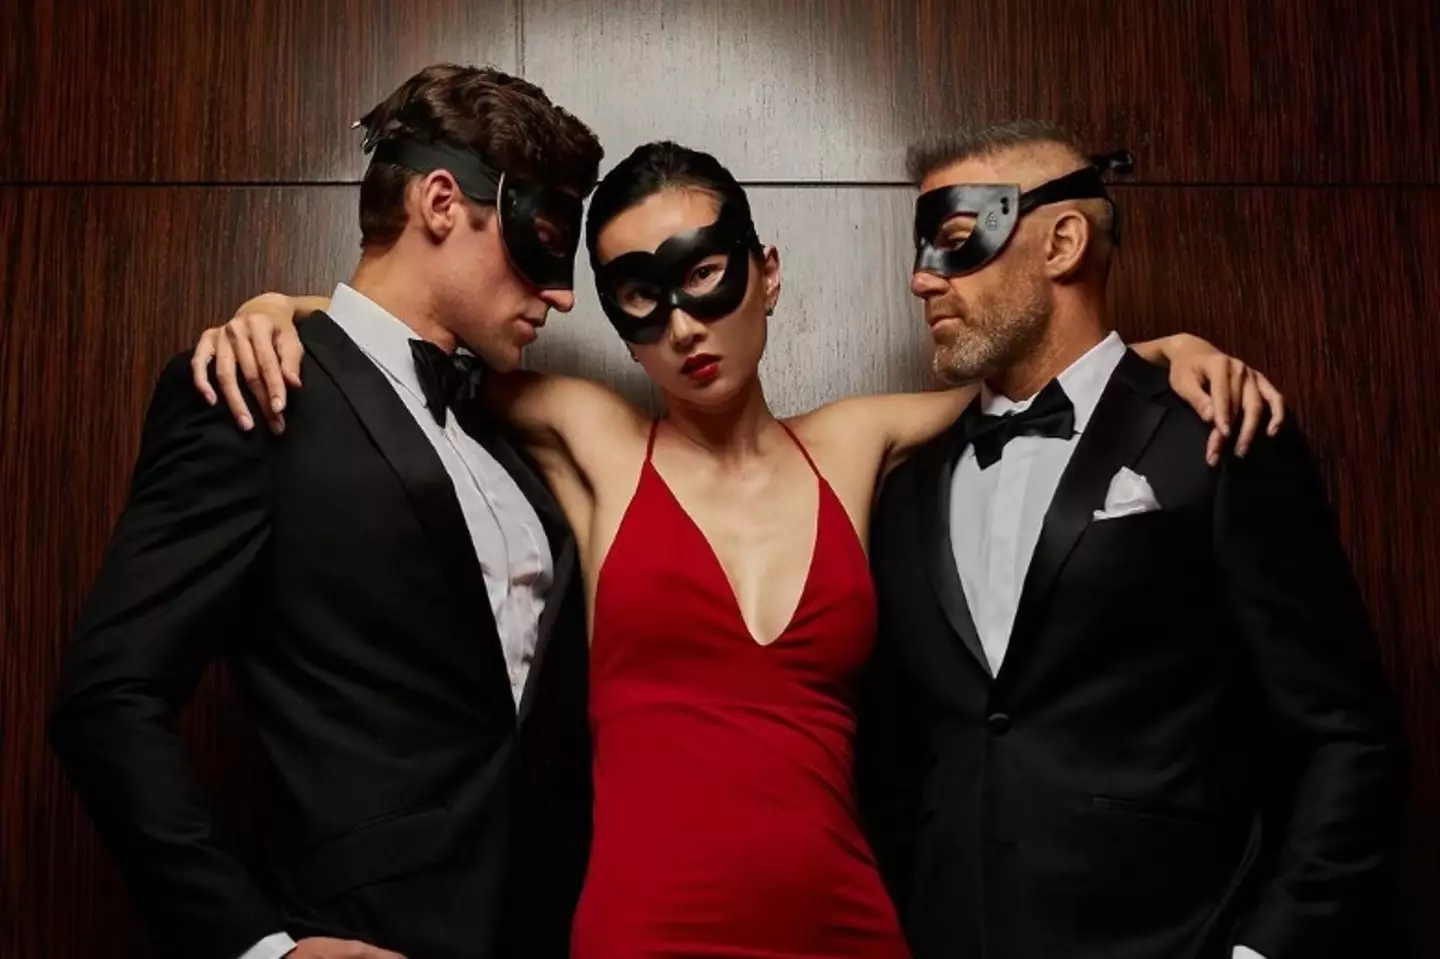 The elite sex club has a black tie dress code, and you're expected to bring your own mask to hide your identity.